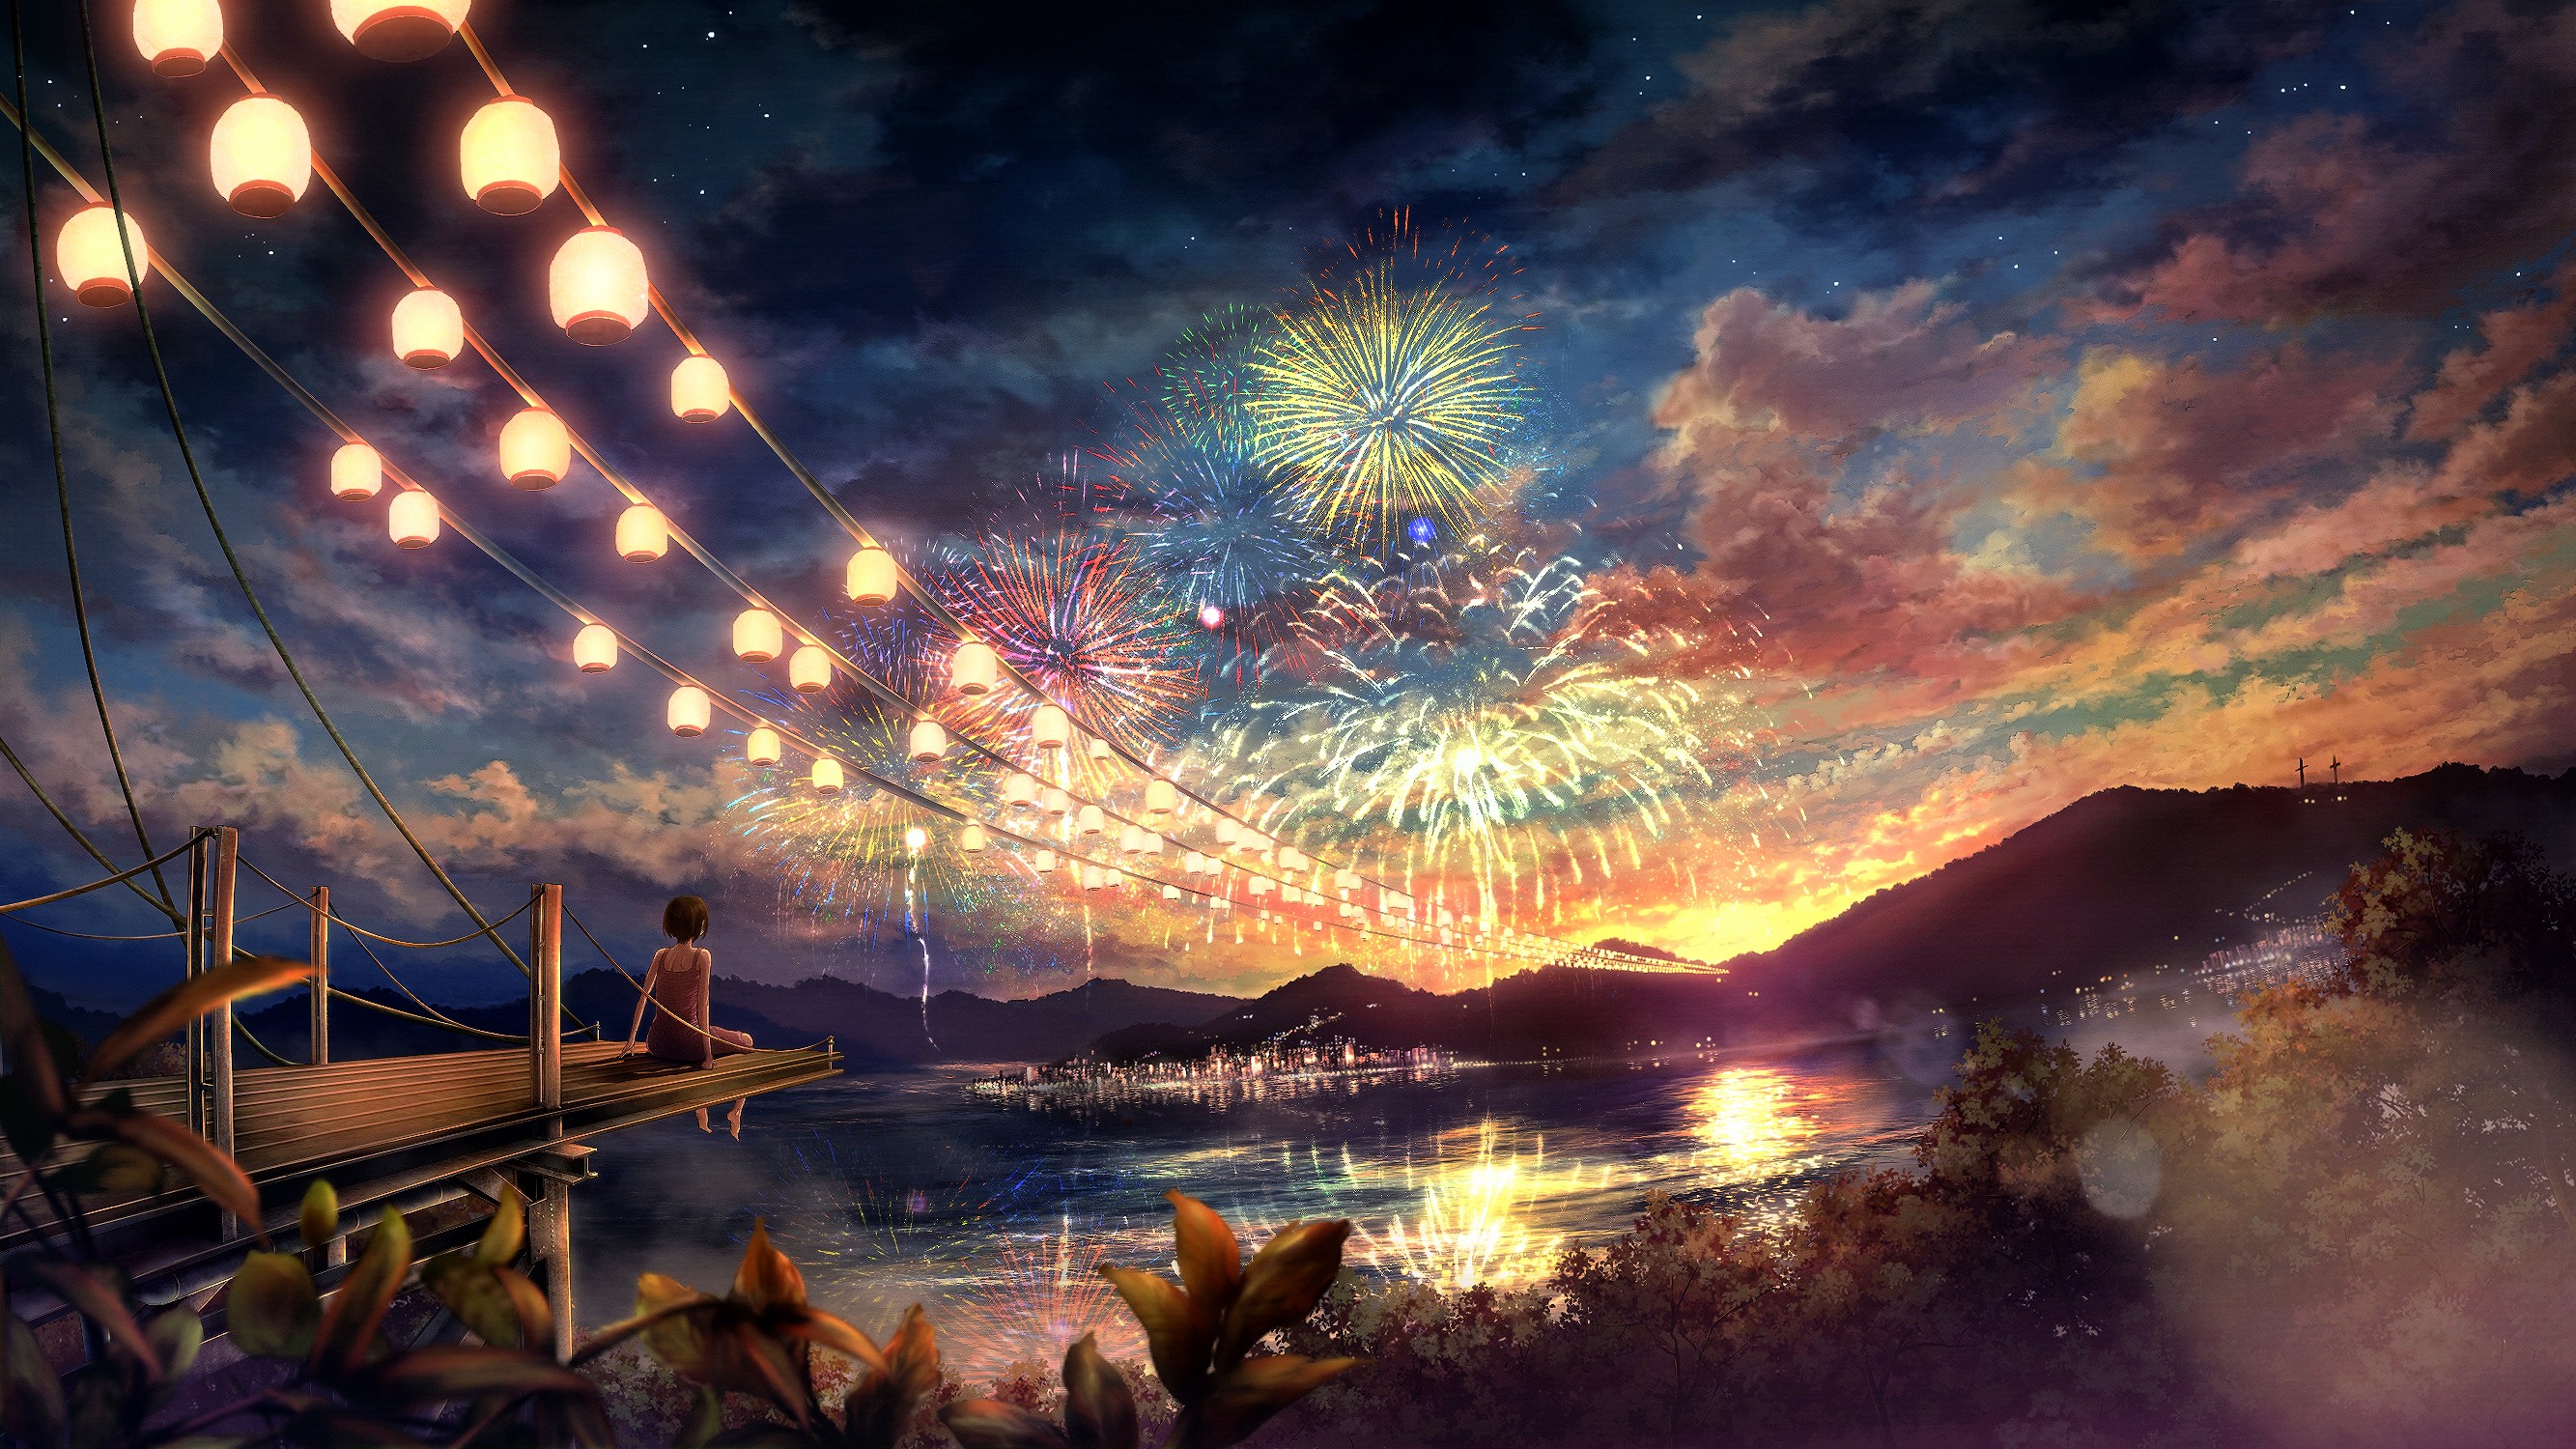 clouds, Landscapes, Trees, Fireworks, Scenic, Anime, Anime, Girls